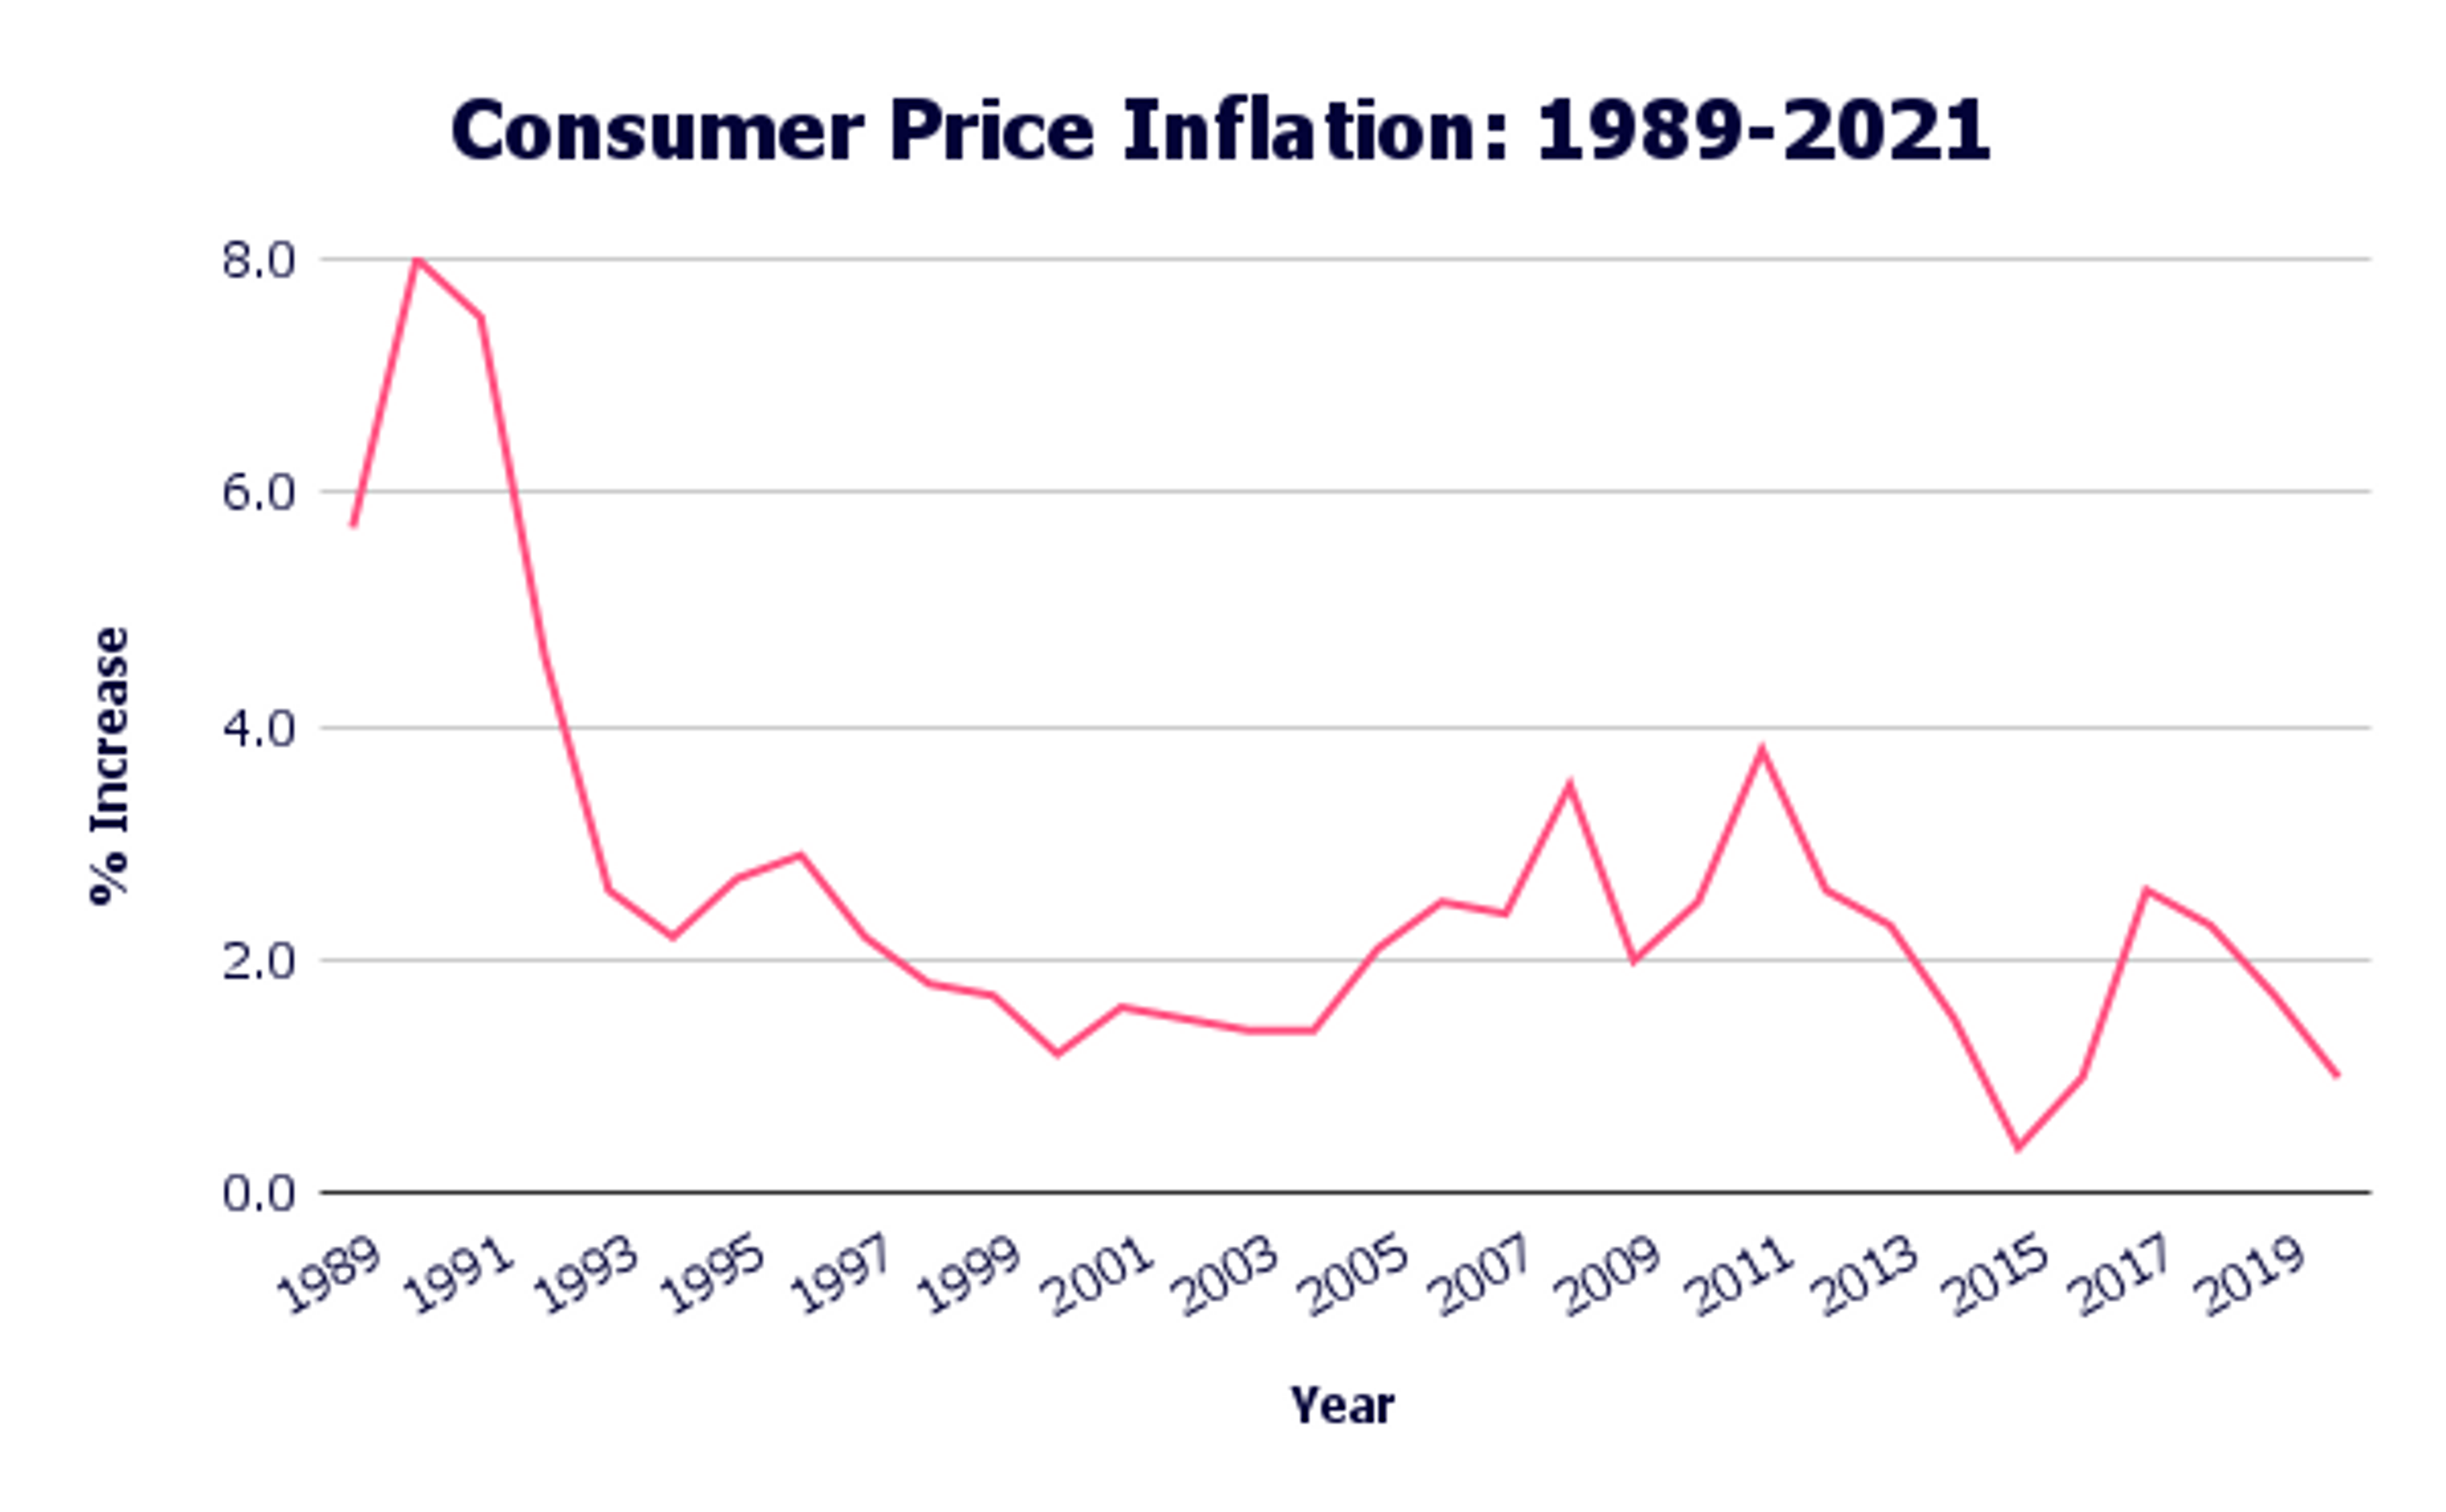 A line chart showing Consumer Price Inflation between 1989 and 2021